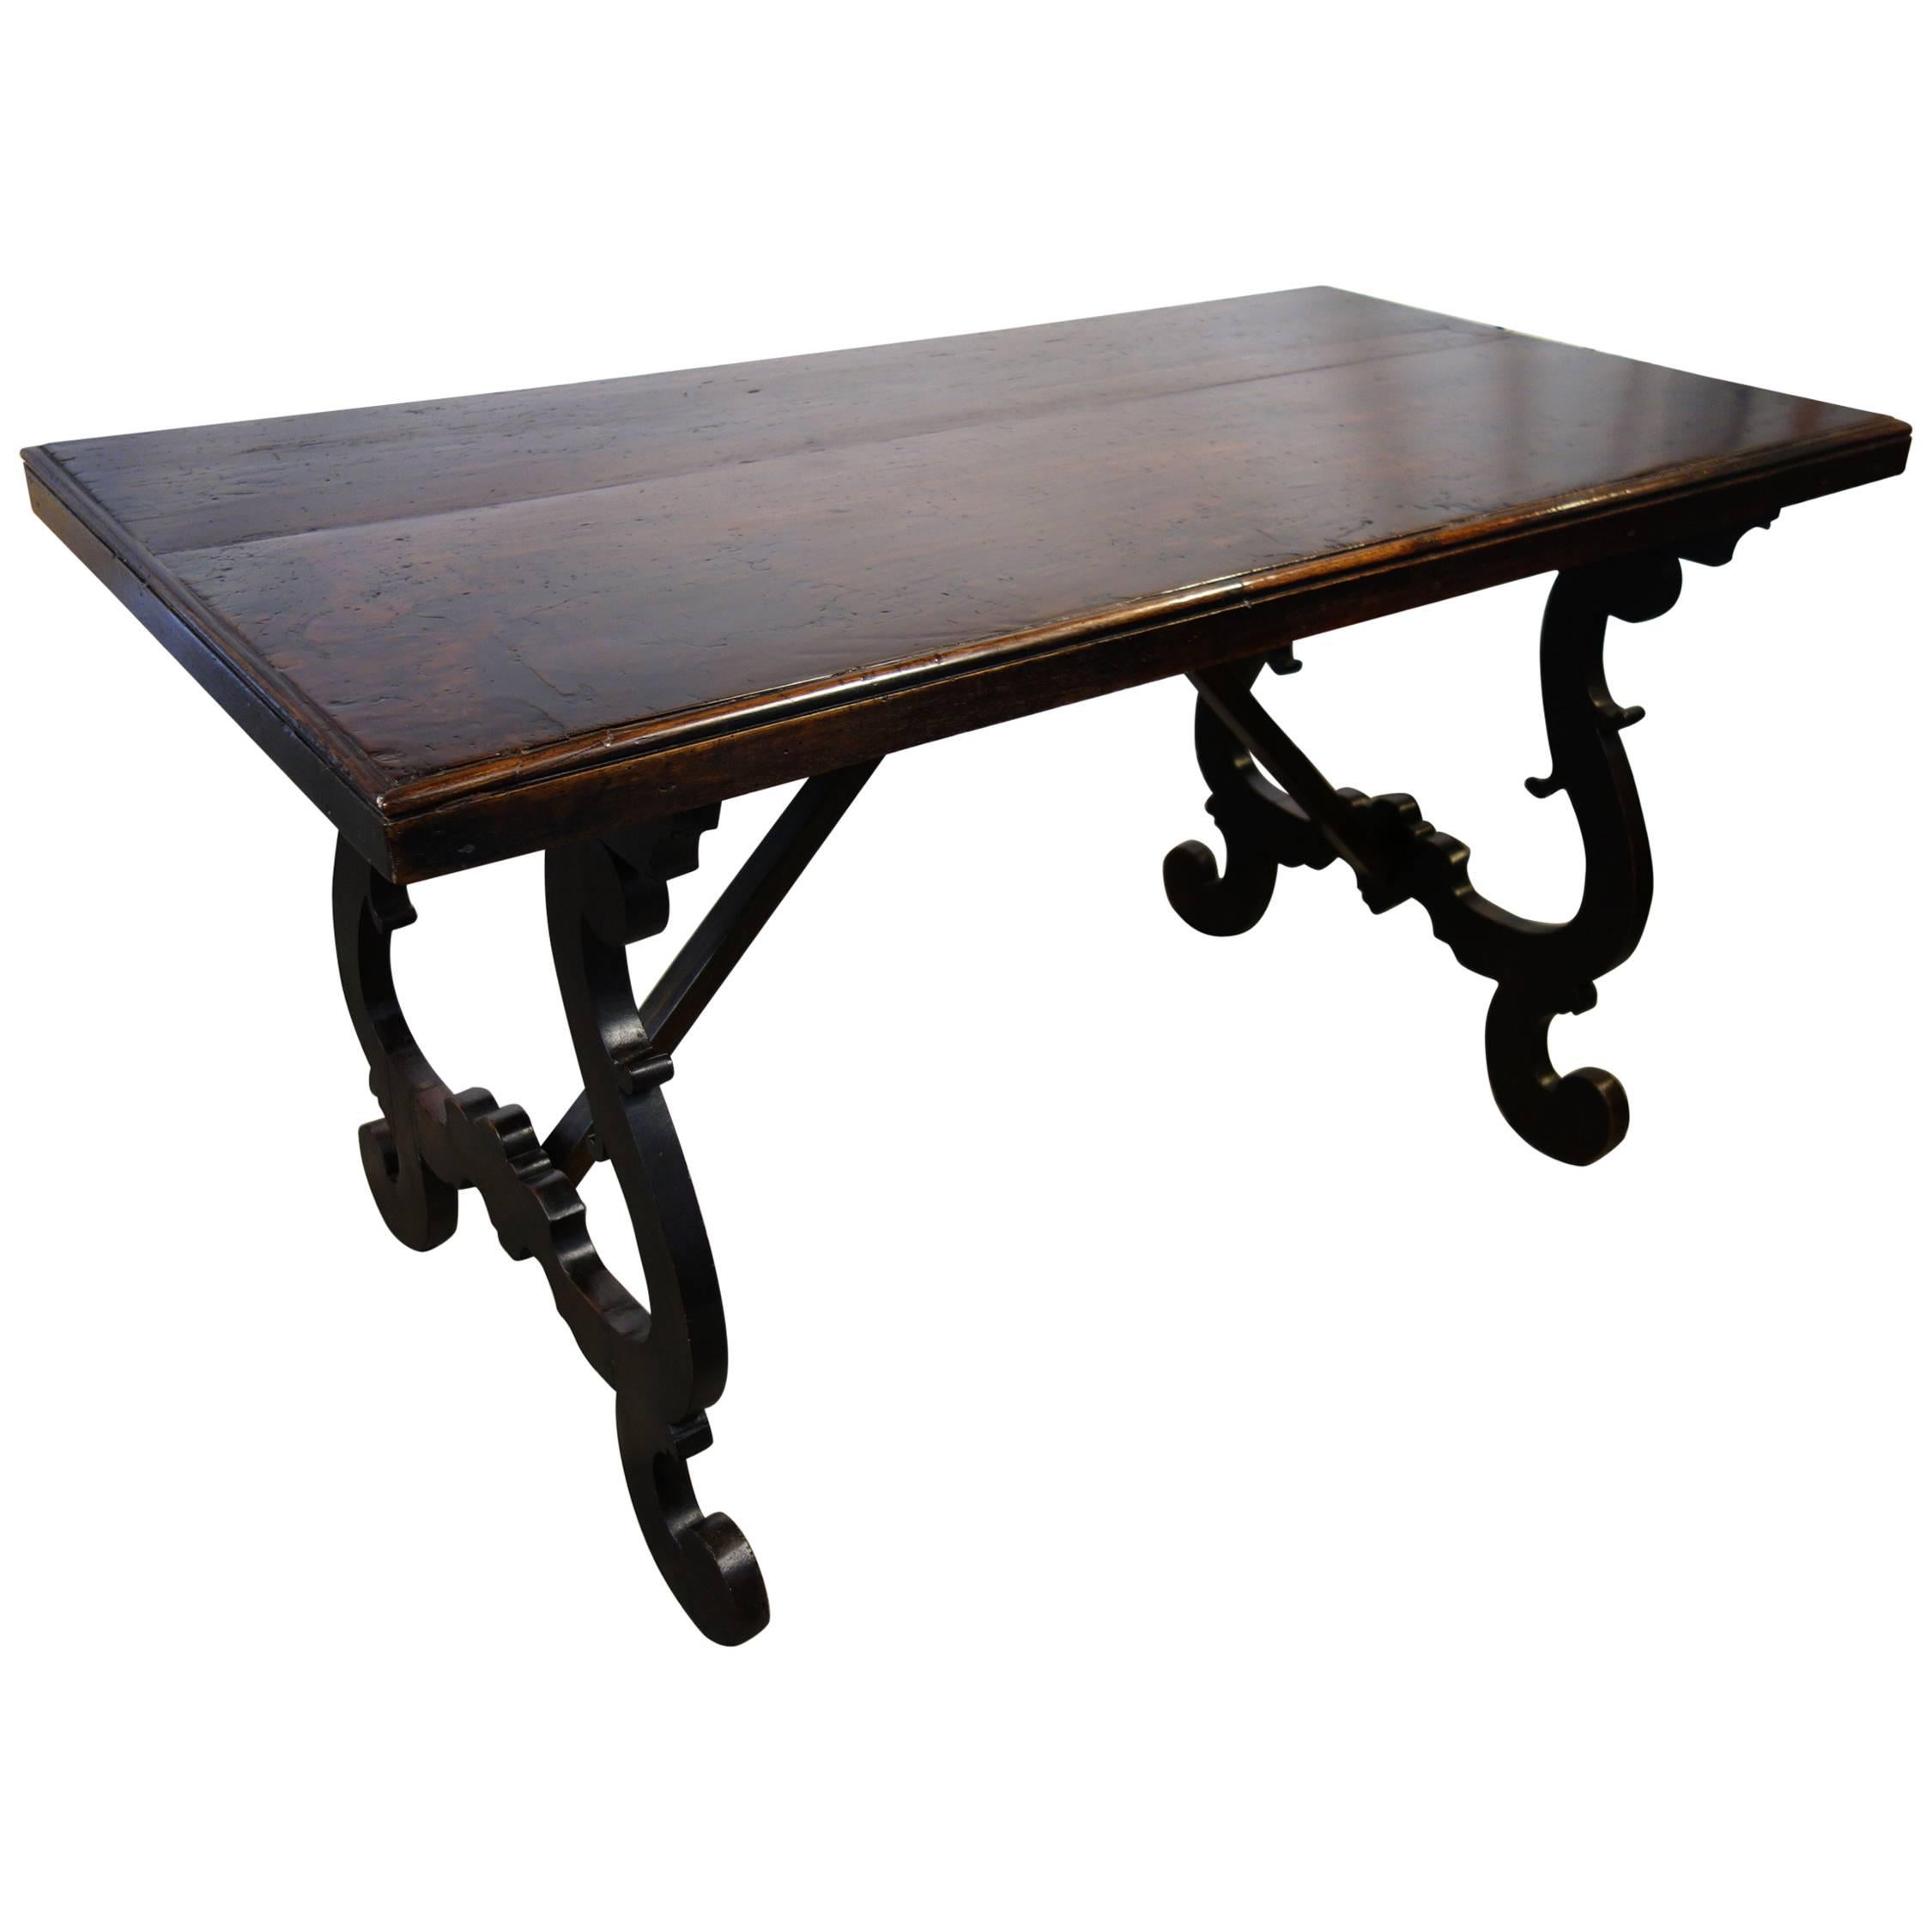 17th Century Tuscan Refectory Style Walnut Table with Lyre Legs